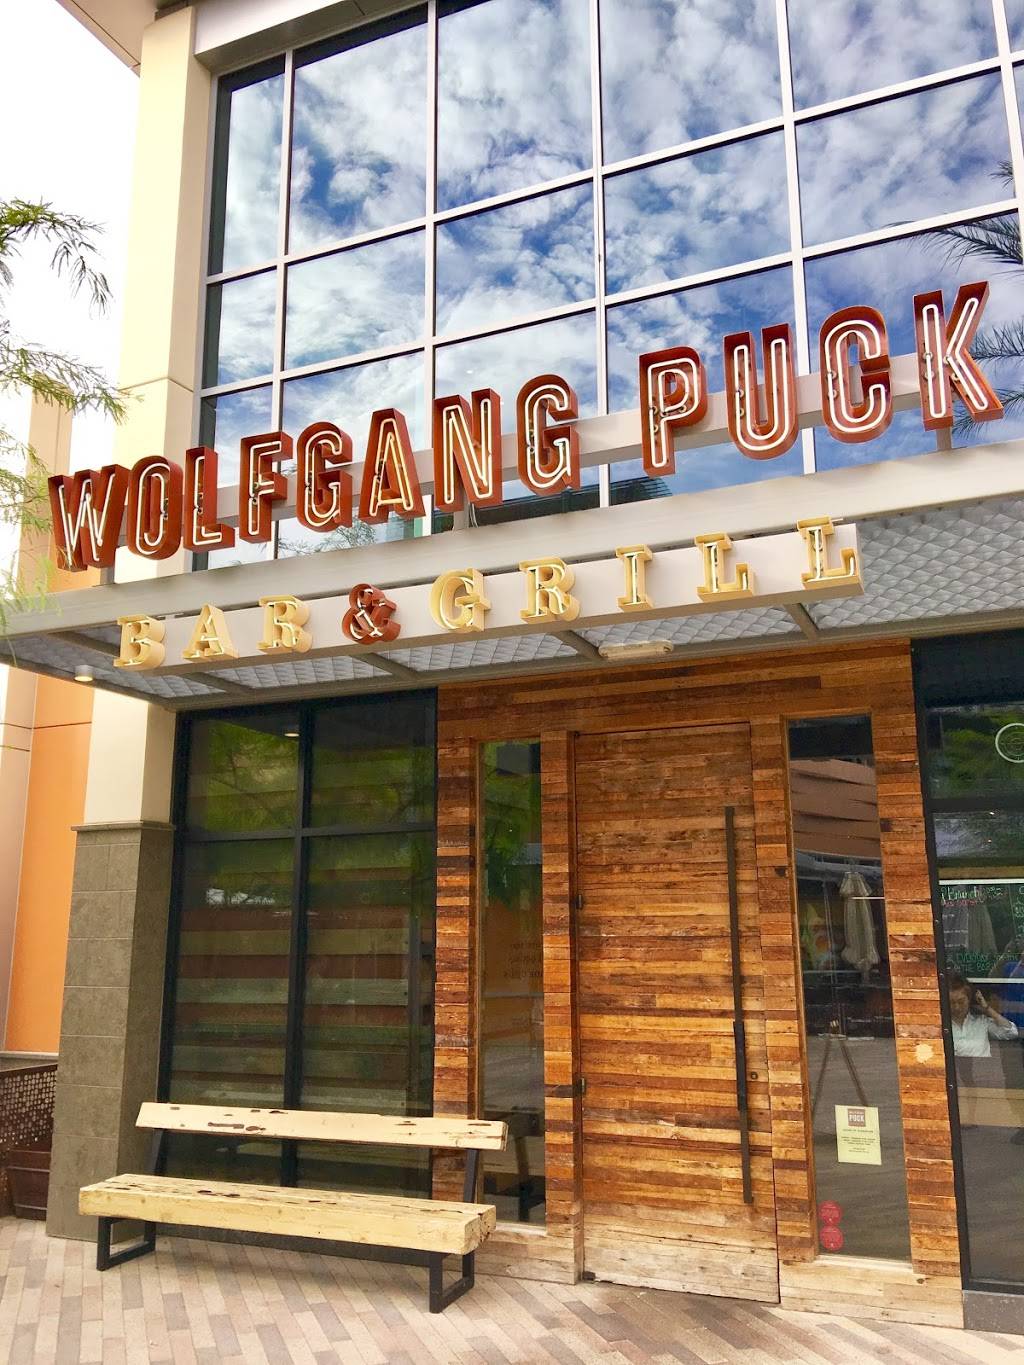 Wolfgang Puck Bar & Grill | restaurant | 10955 Oval Park Dr, Las Vegas, NV 89135, USA | 7022026300 OR +1 702-202-6300